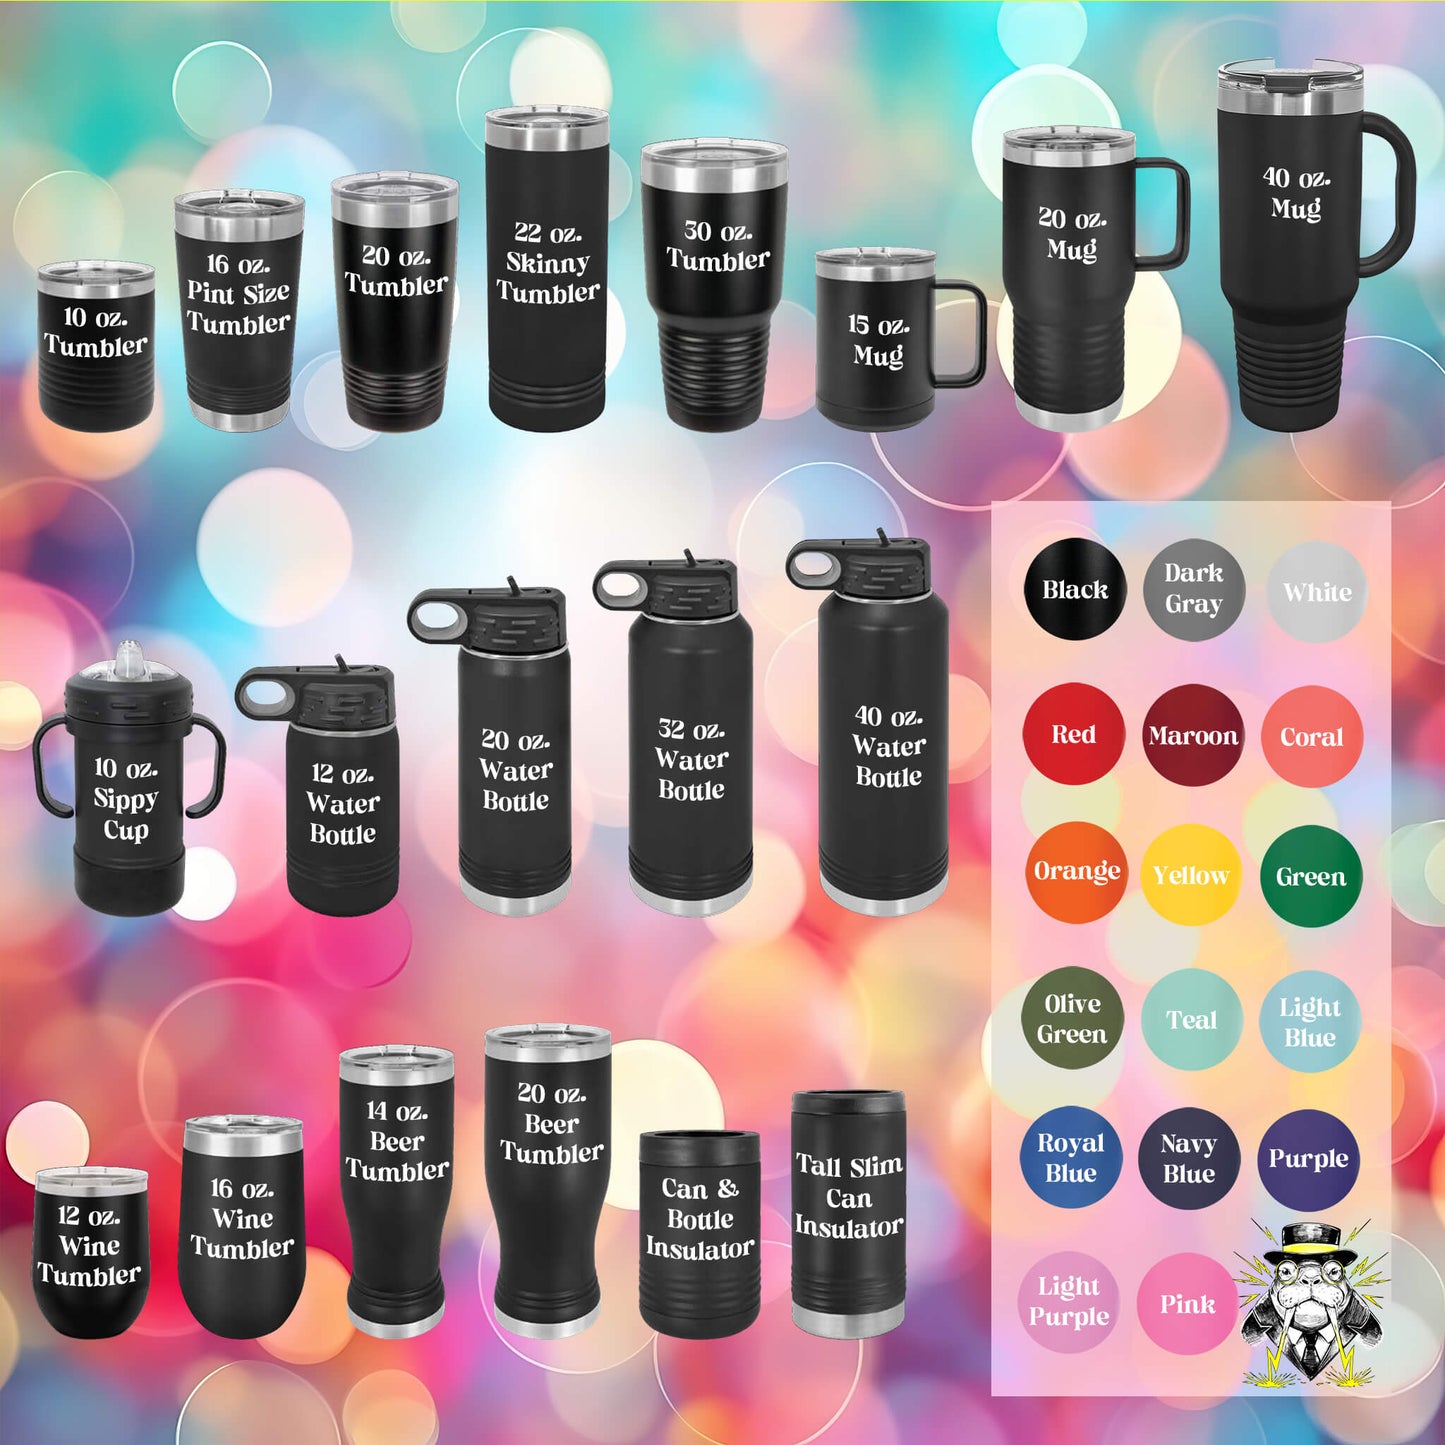 All 19 drinkware options in black labeled with their sizes. Includes all 17 color options as dots.